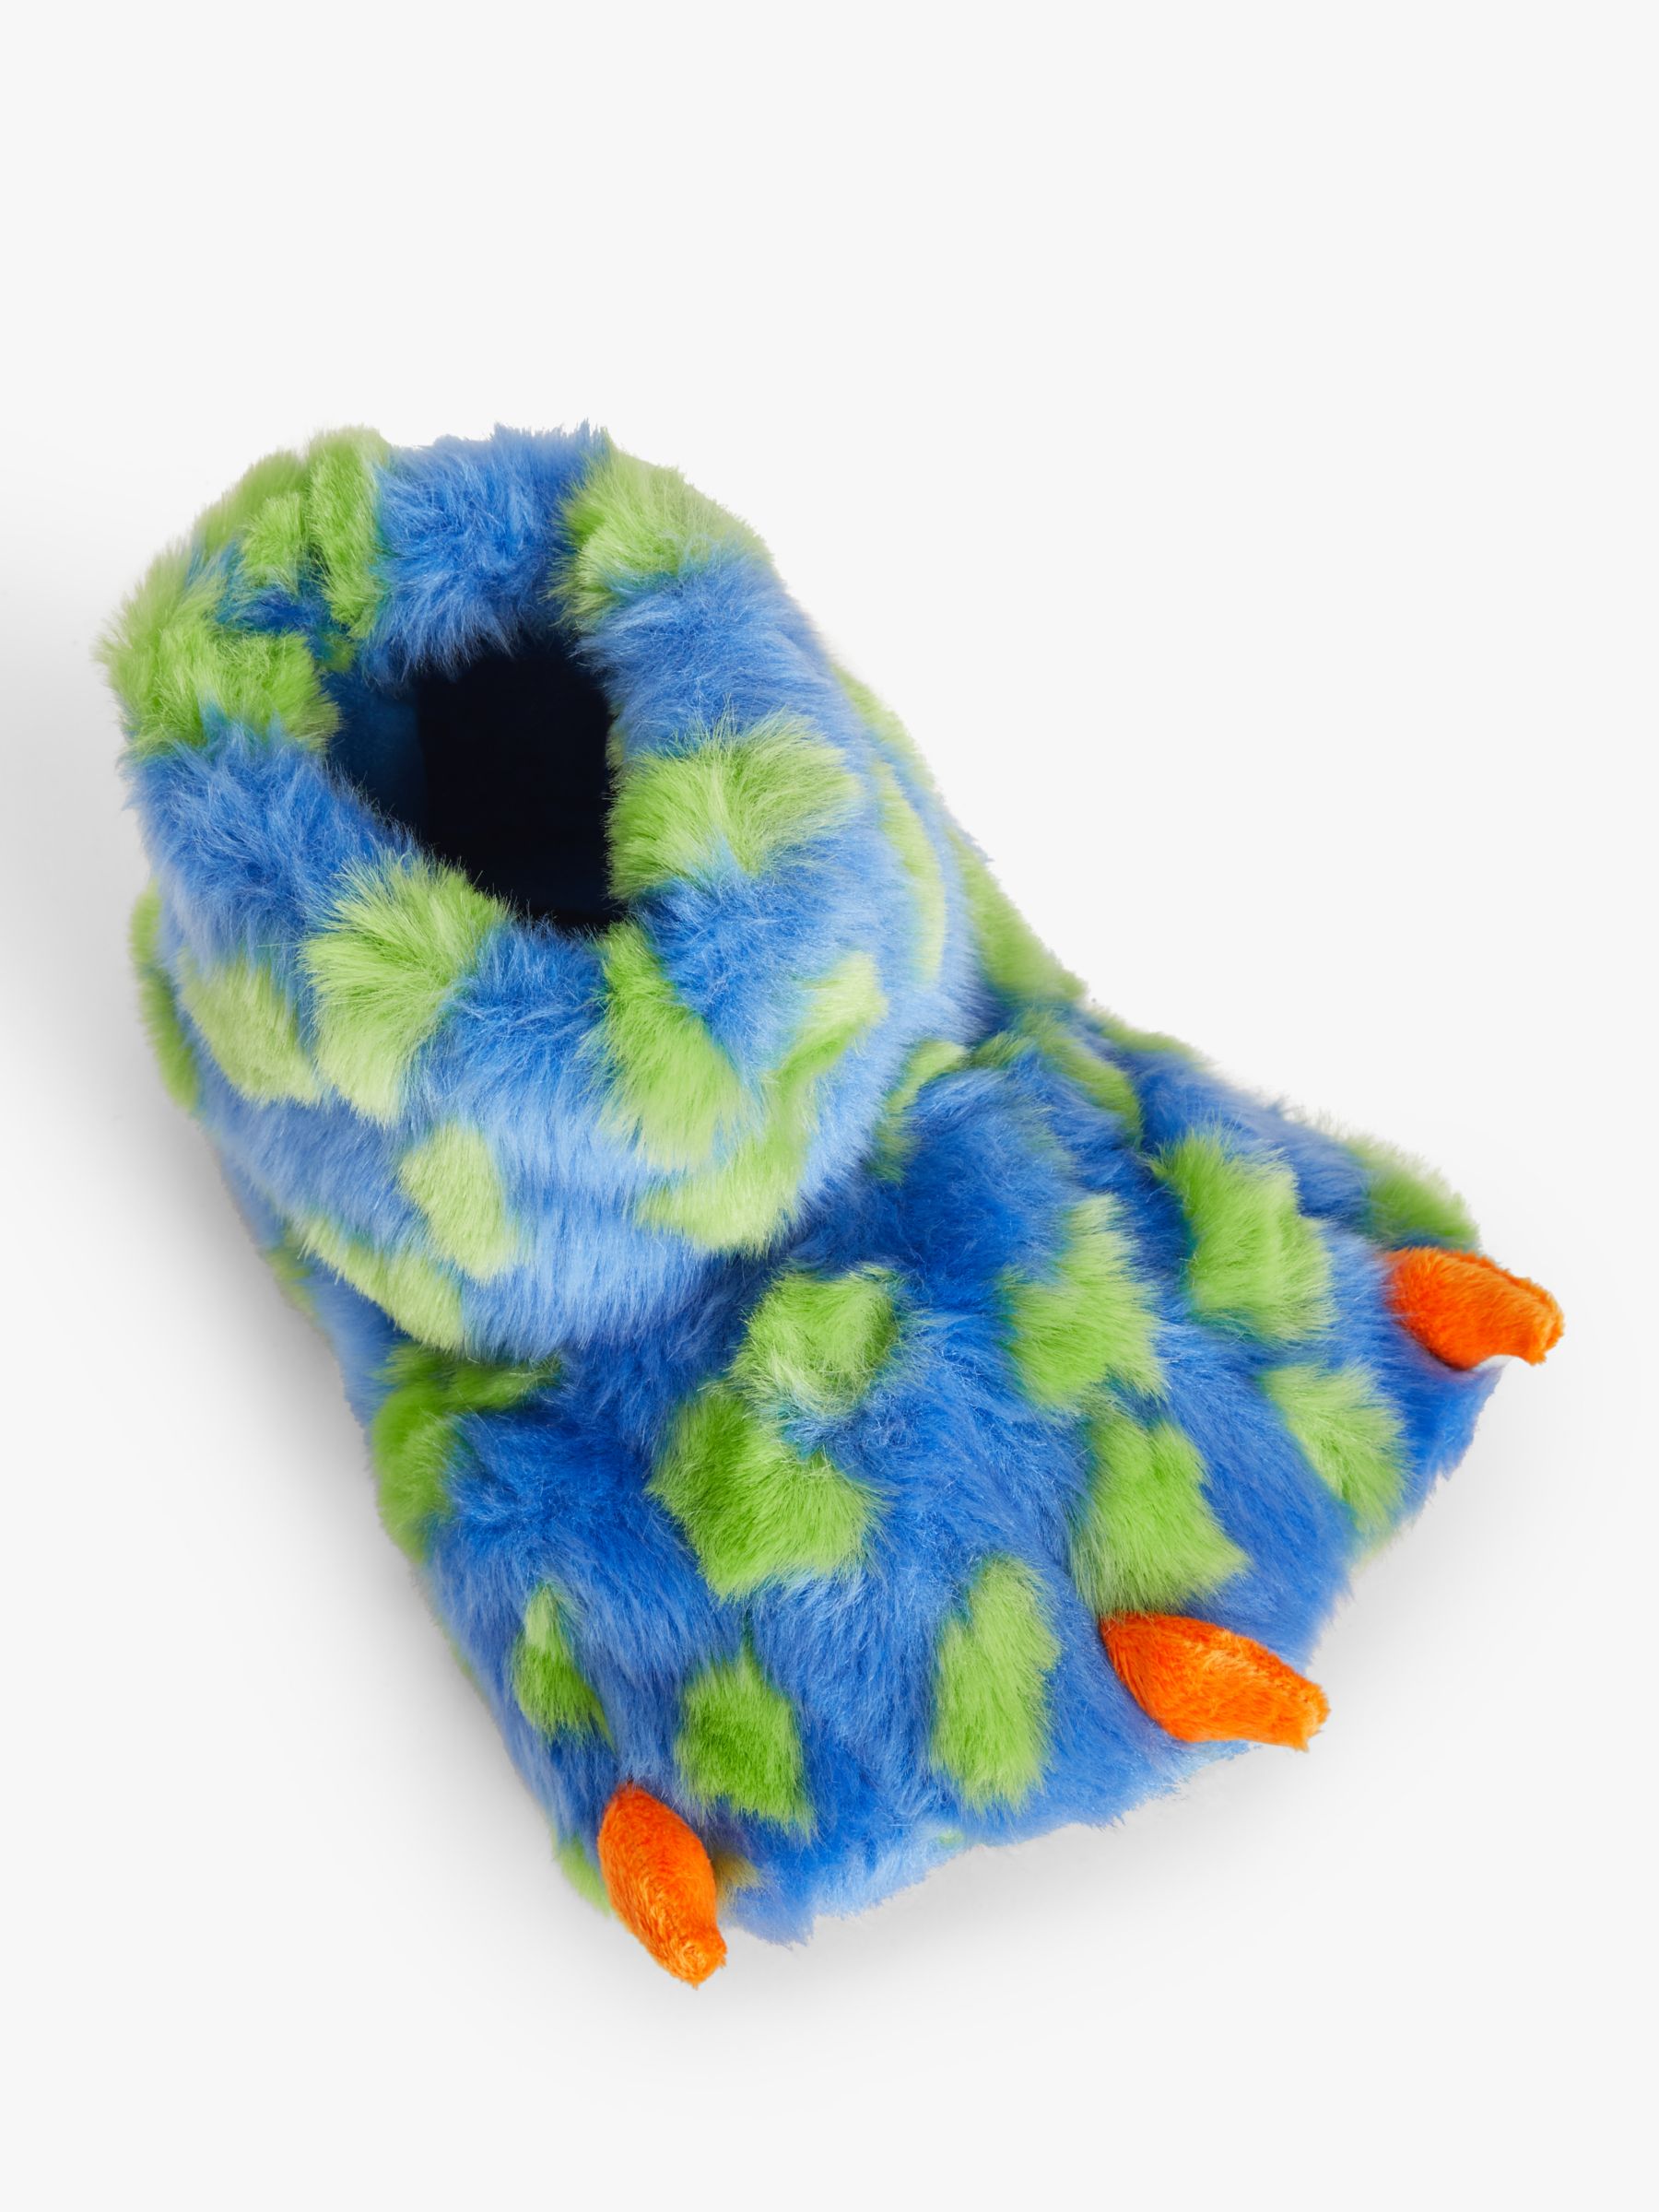 Buy John Lewis Children's Spotty Claw Boot Slippers Online at johnlewis.com